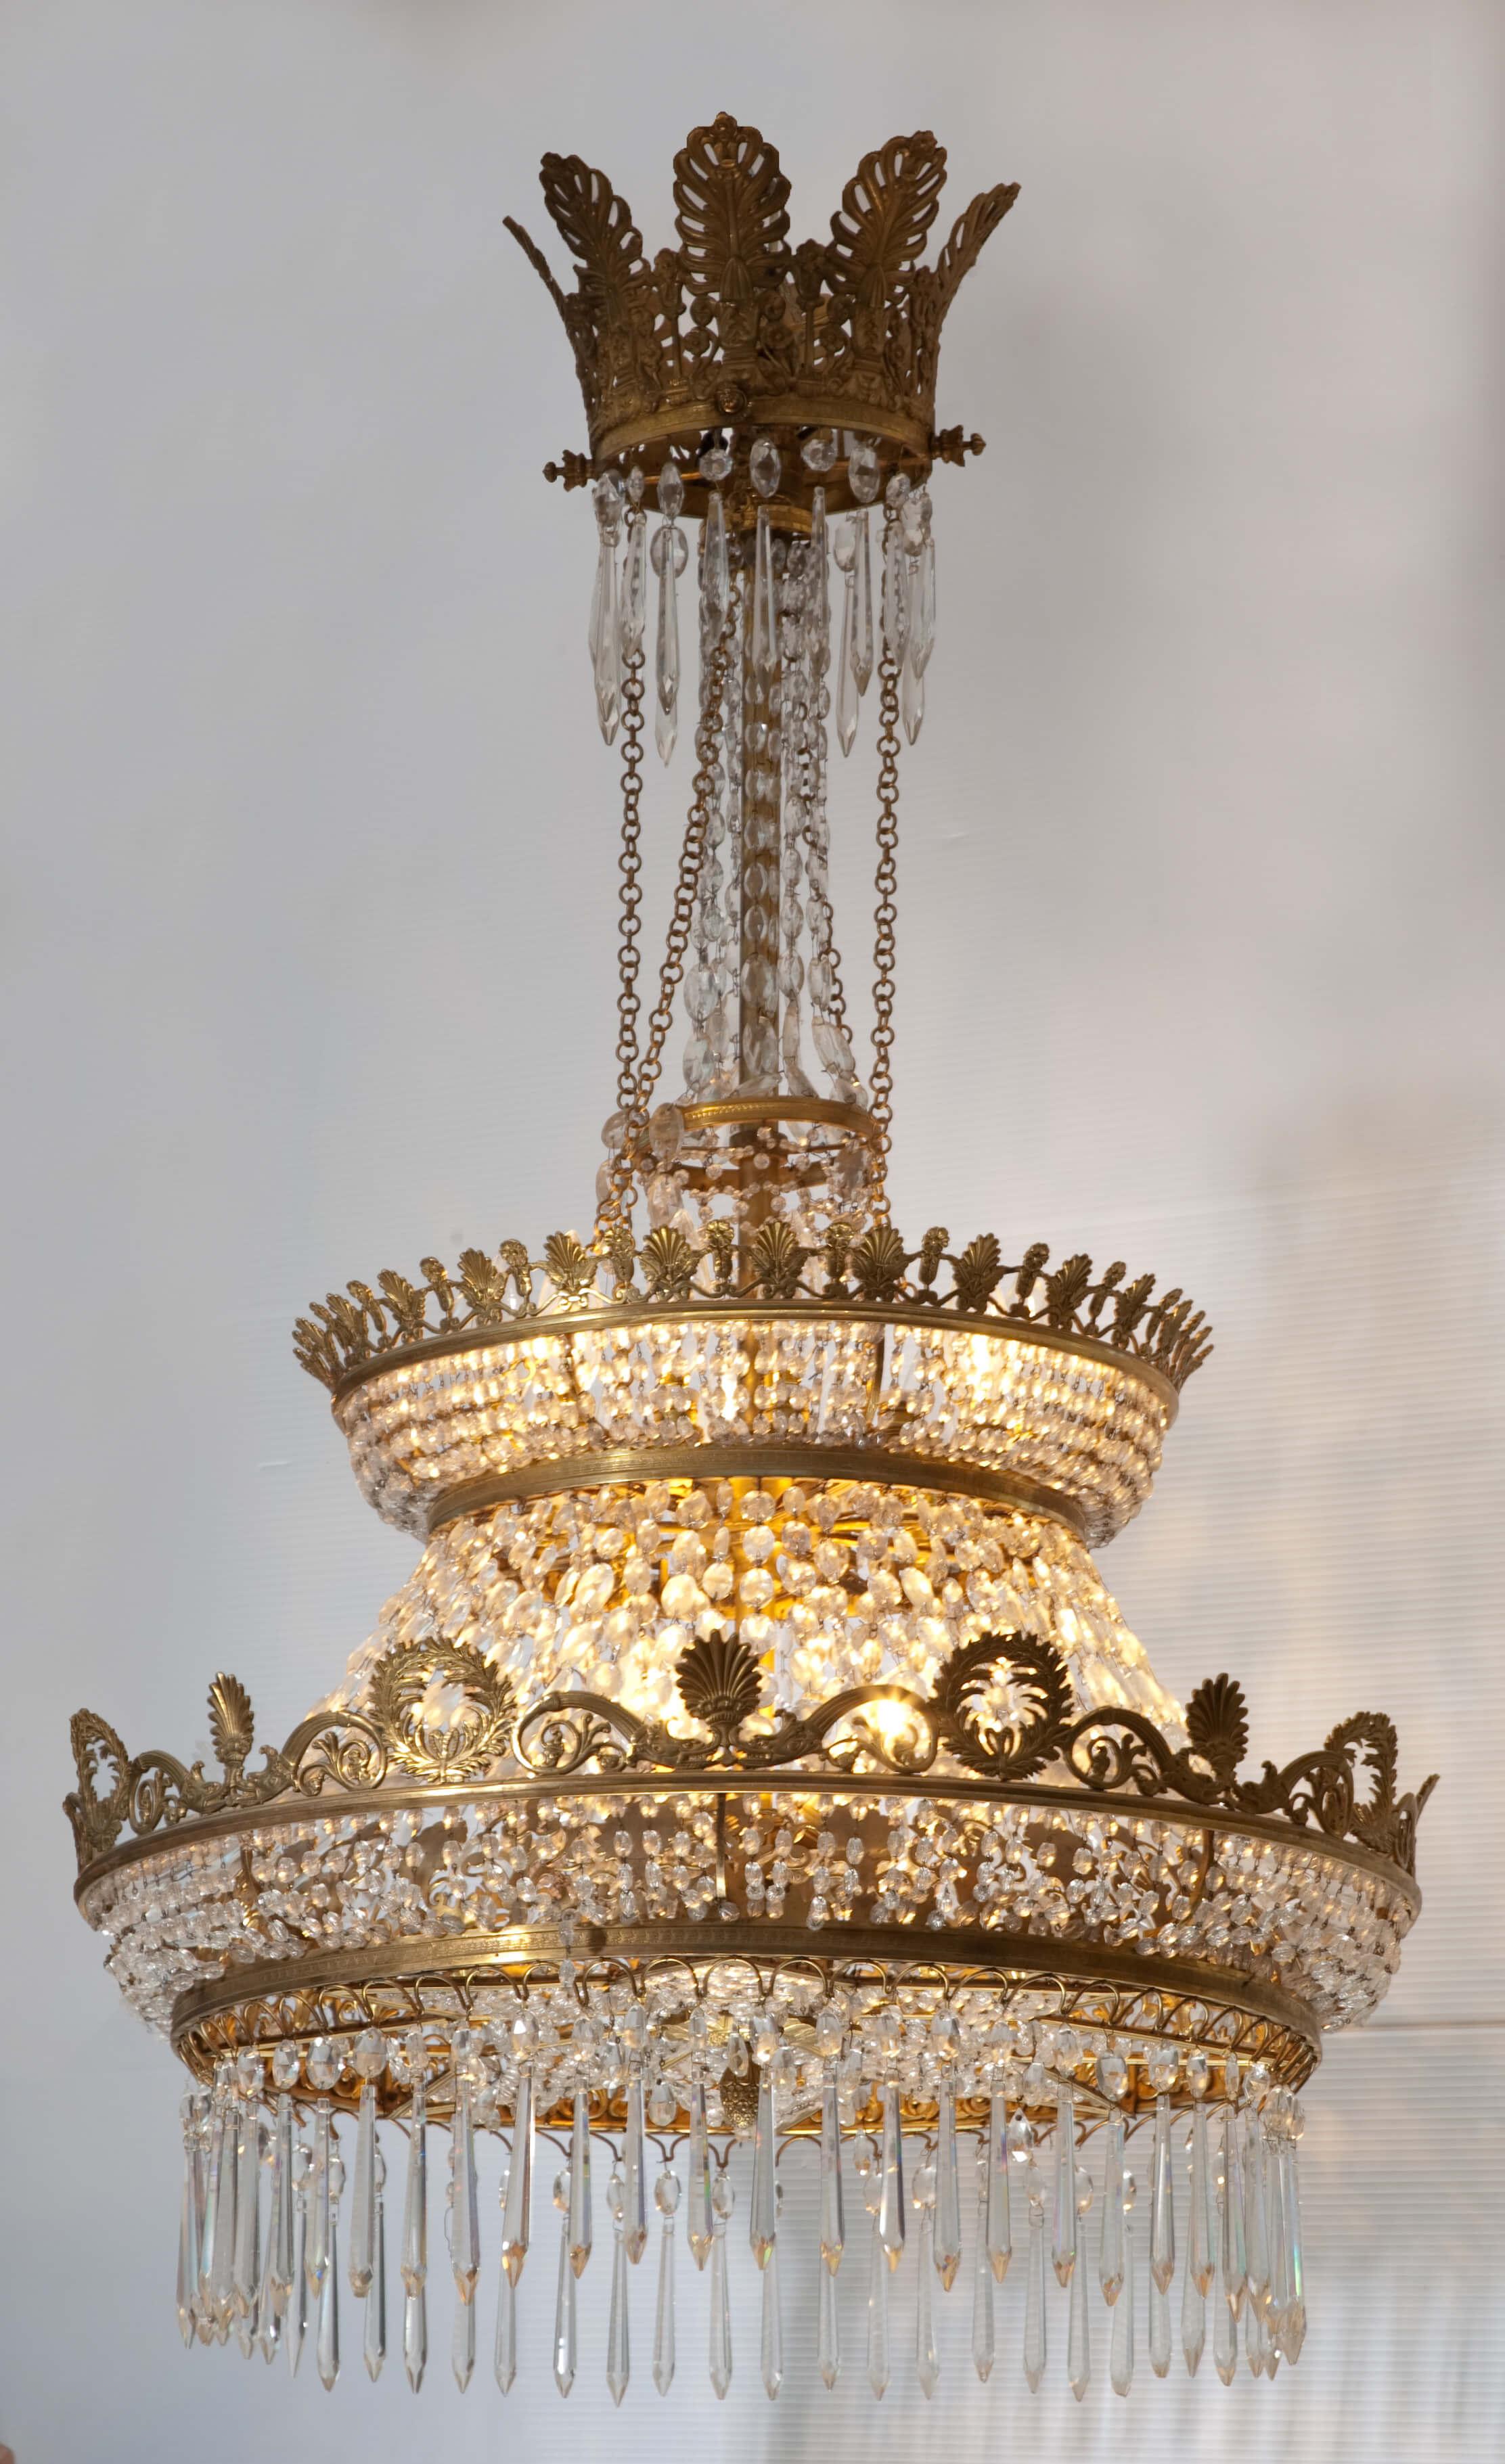 An Empire style chandelier in gilded bronze and cut crystal. The large central ring is embellished with palmettes and wreaths and supports beaded chains and long crystal French drops. The underside of the ring is star shaped and woven with crystal